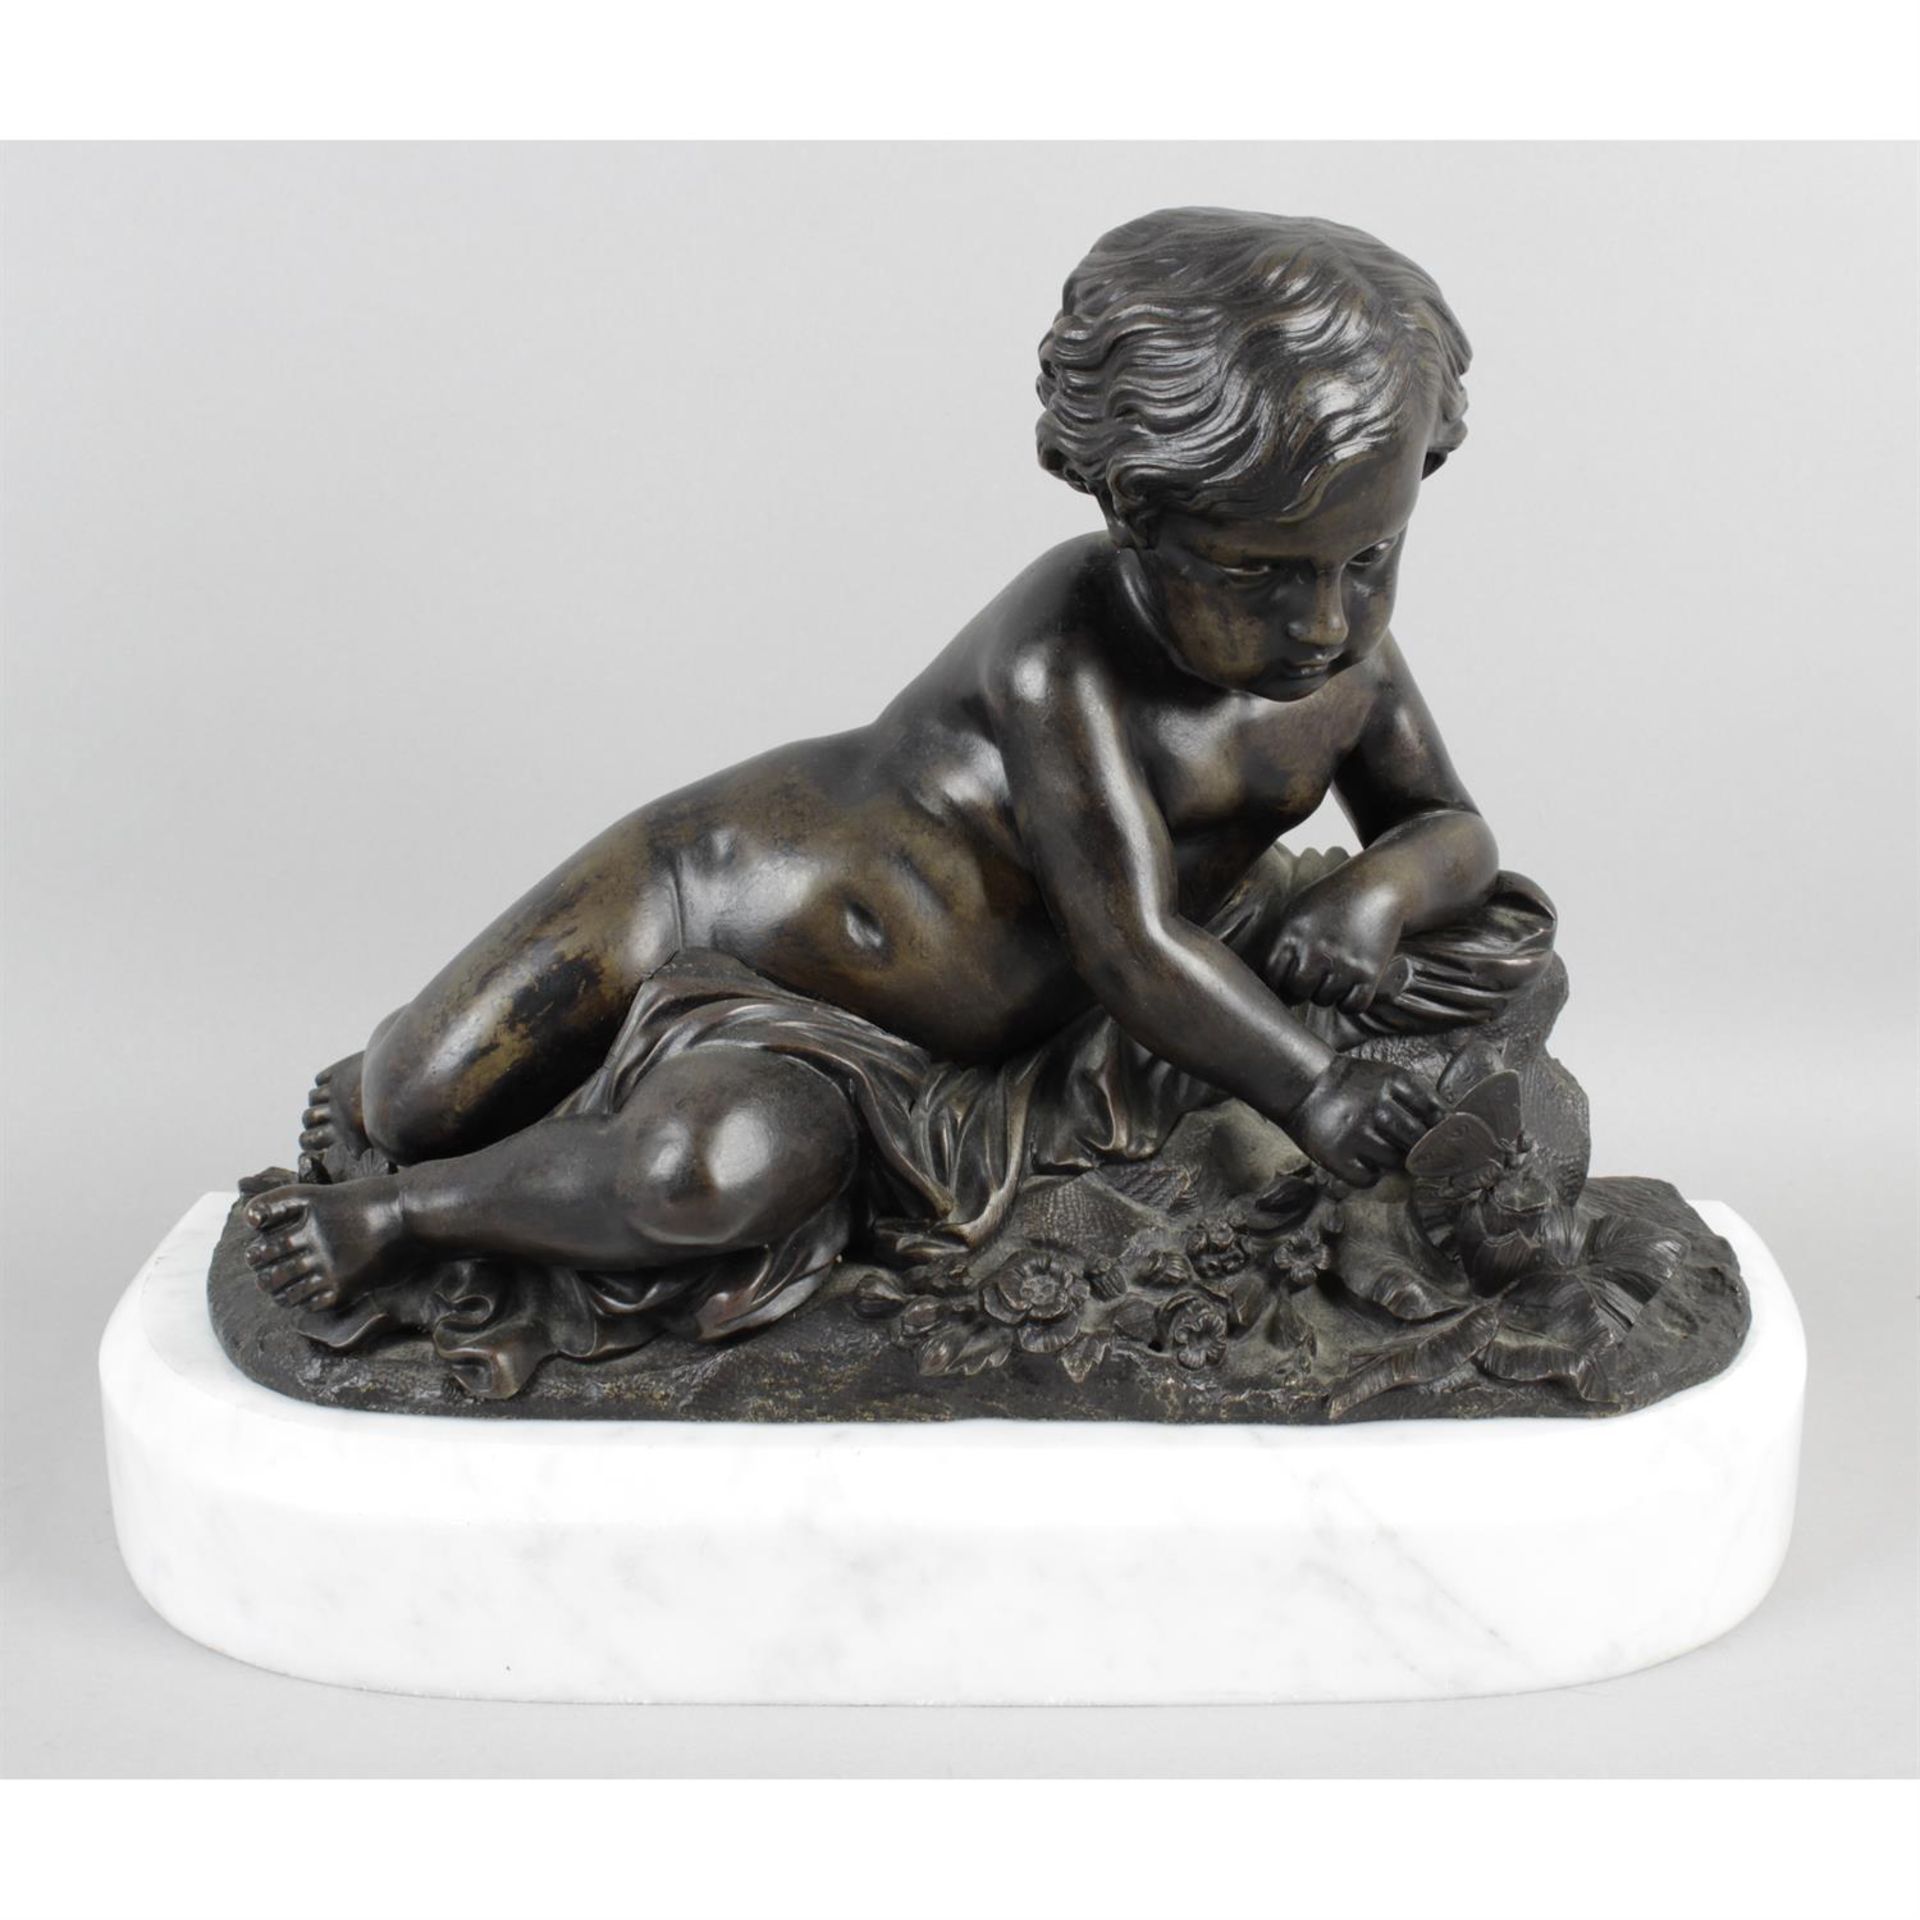 A bronze figure modelled as an infant in lateral recumbent position.